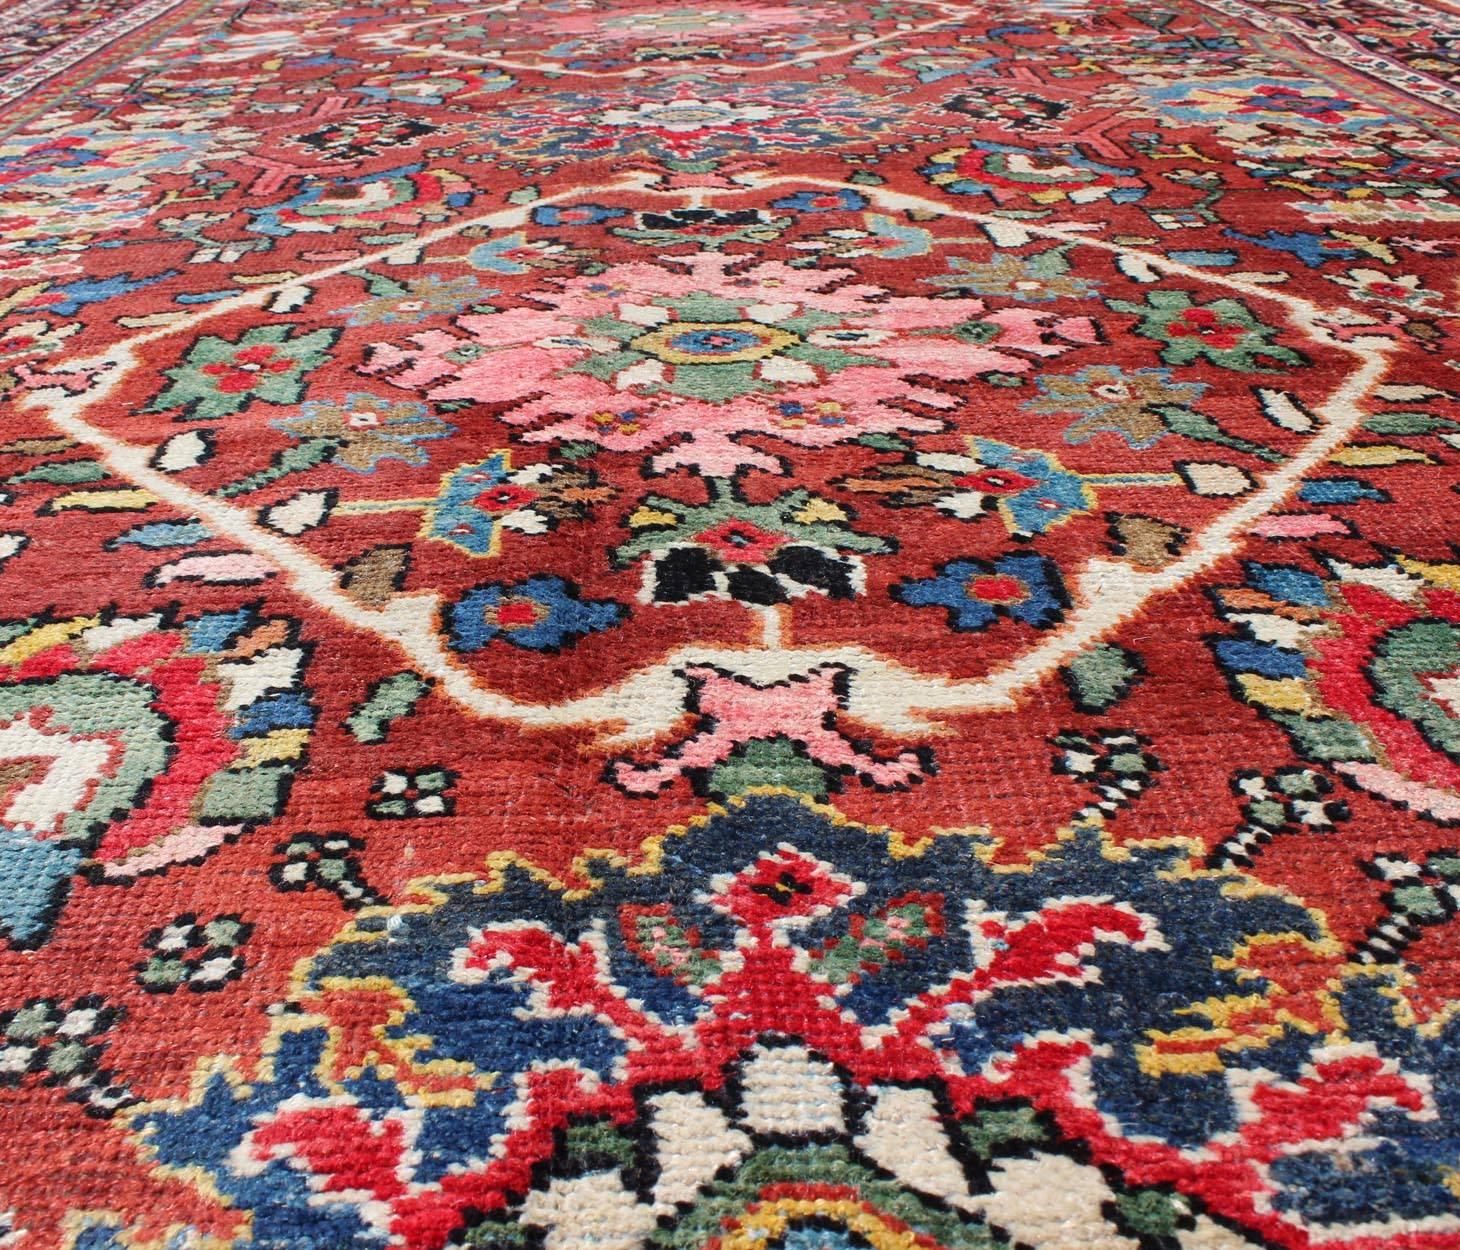 20th Century Midcentury Persian Mahal Rug with Dual Medallion Design in Red and Black